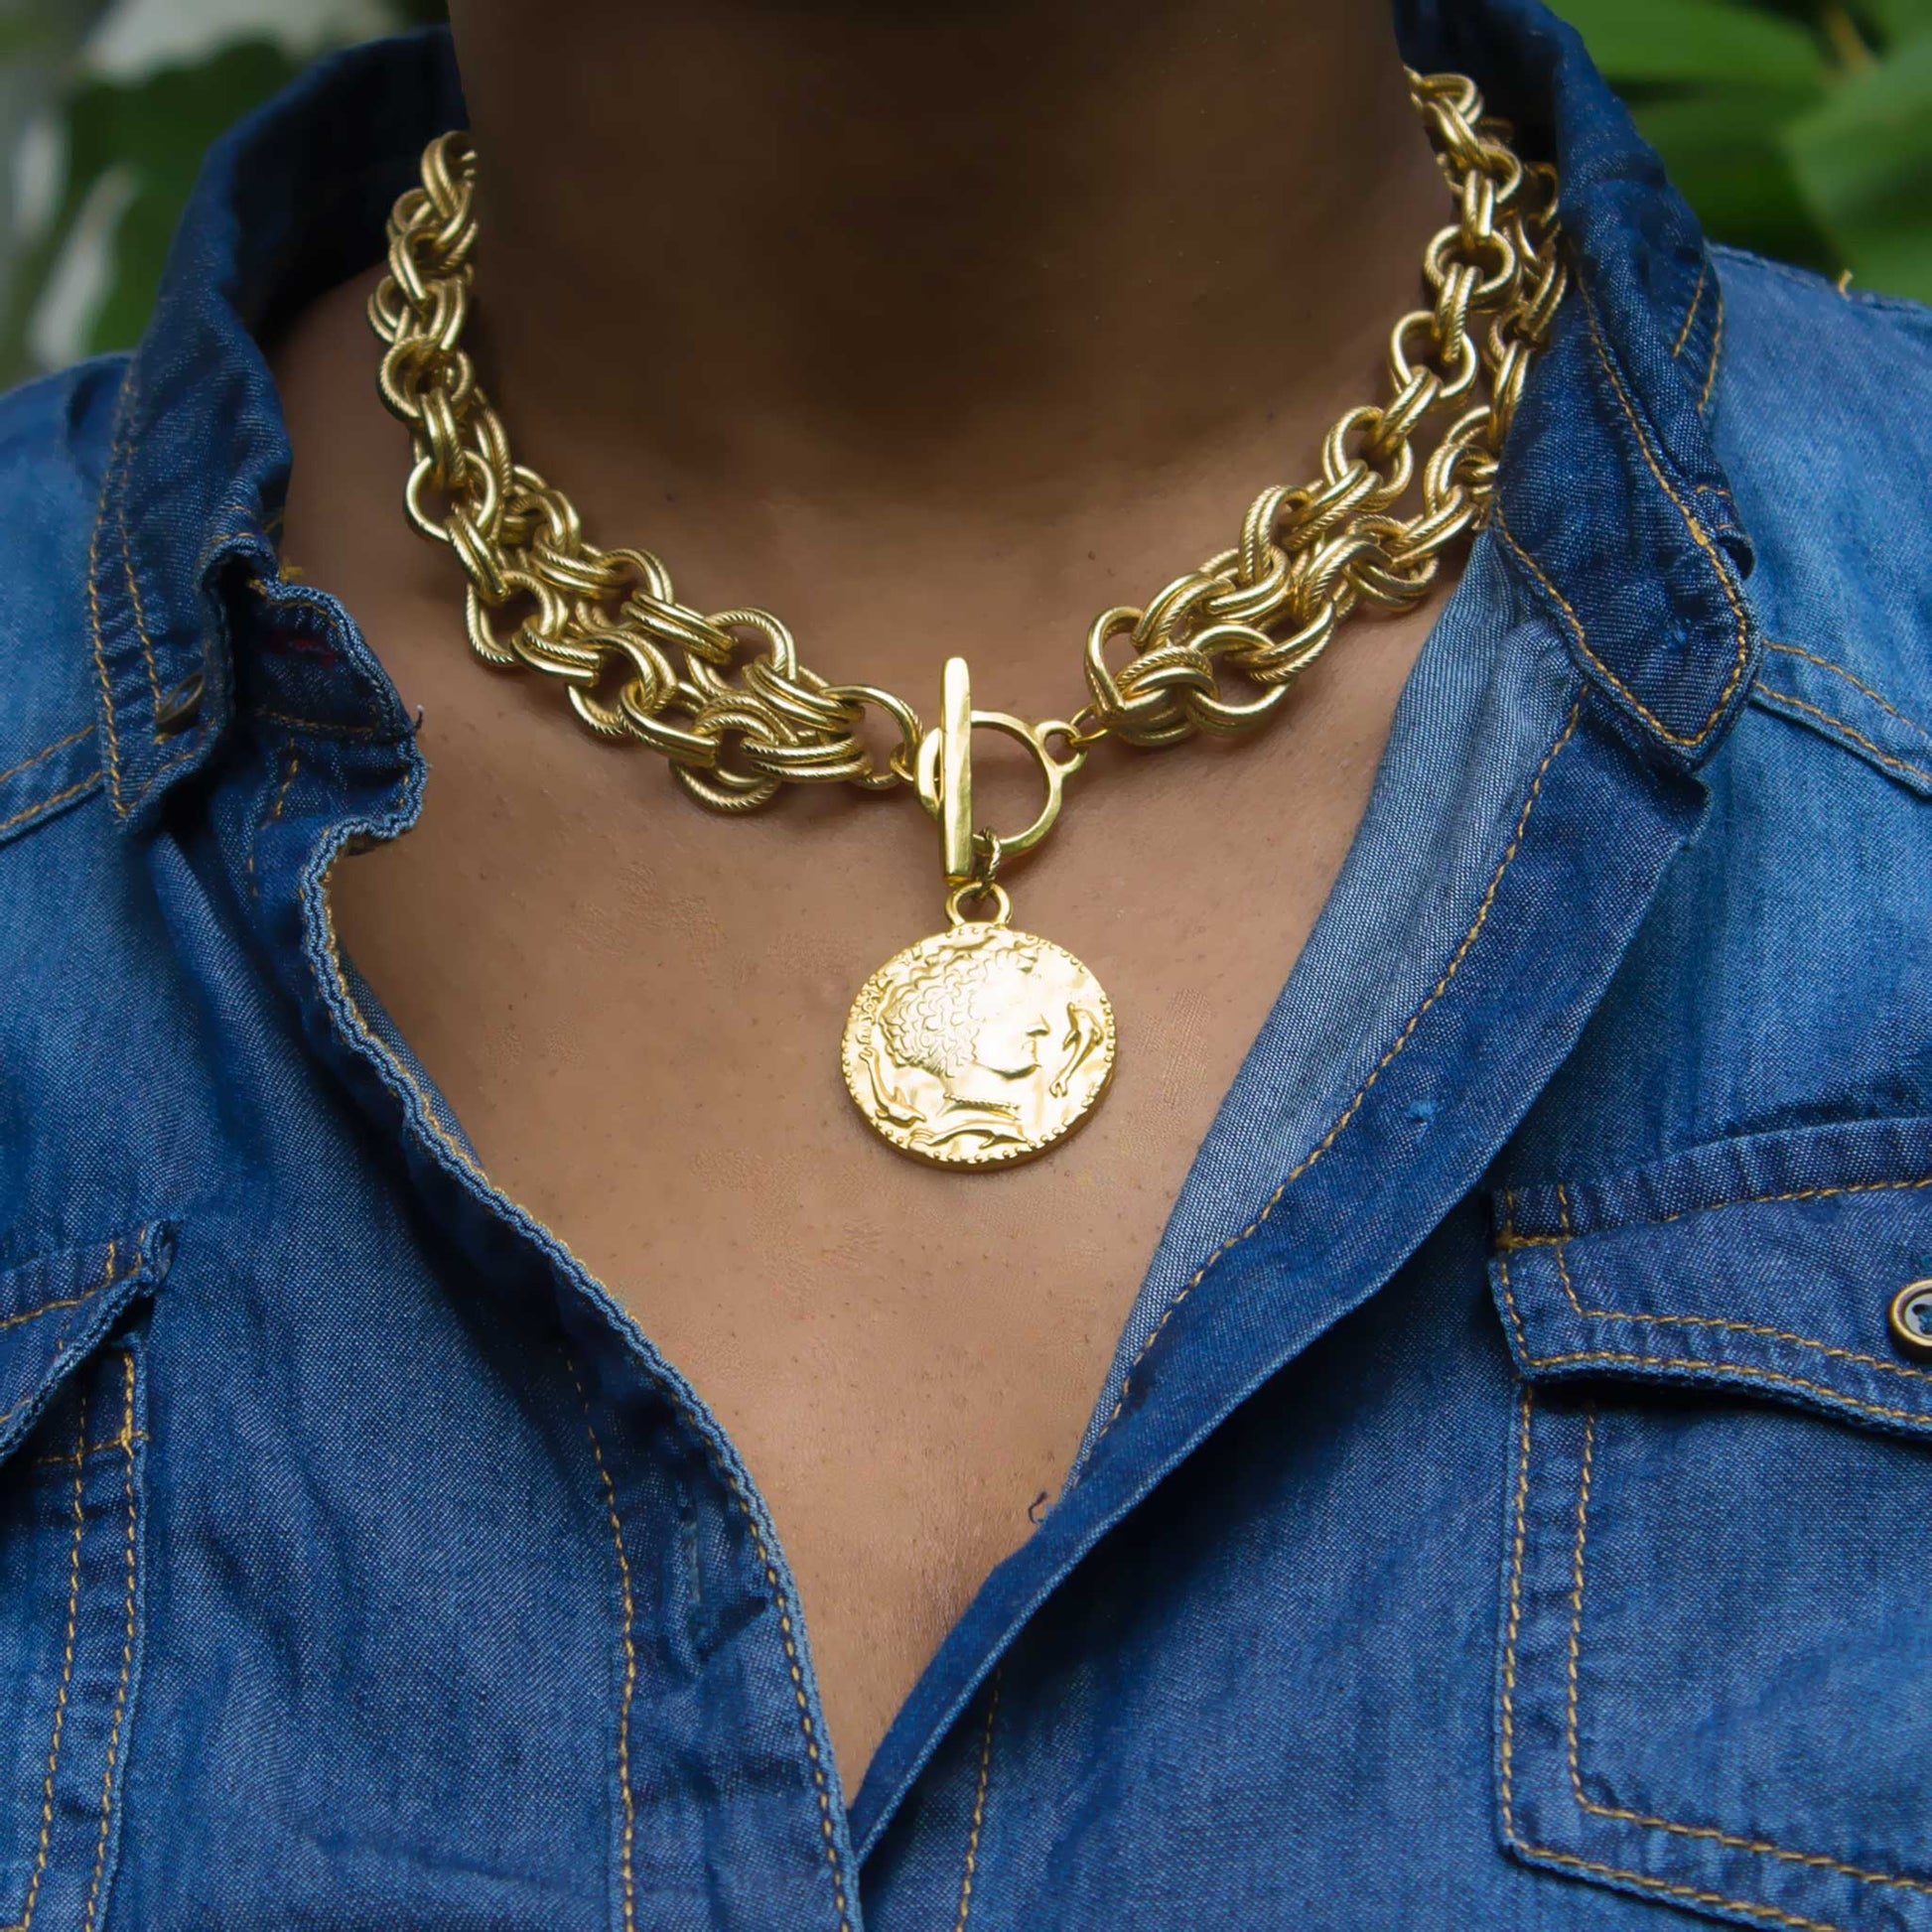 Coin Charm necklace Jewelry on model